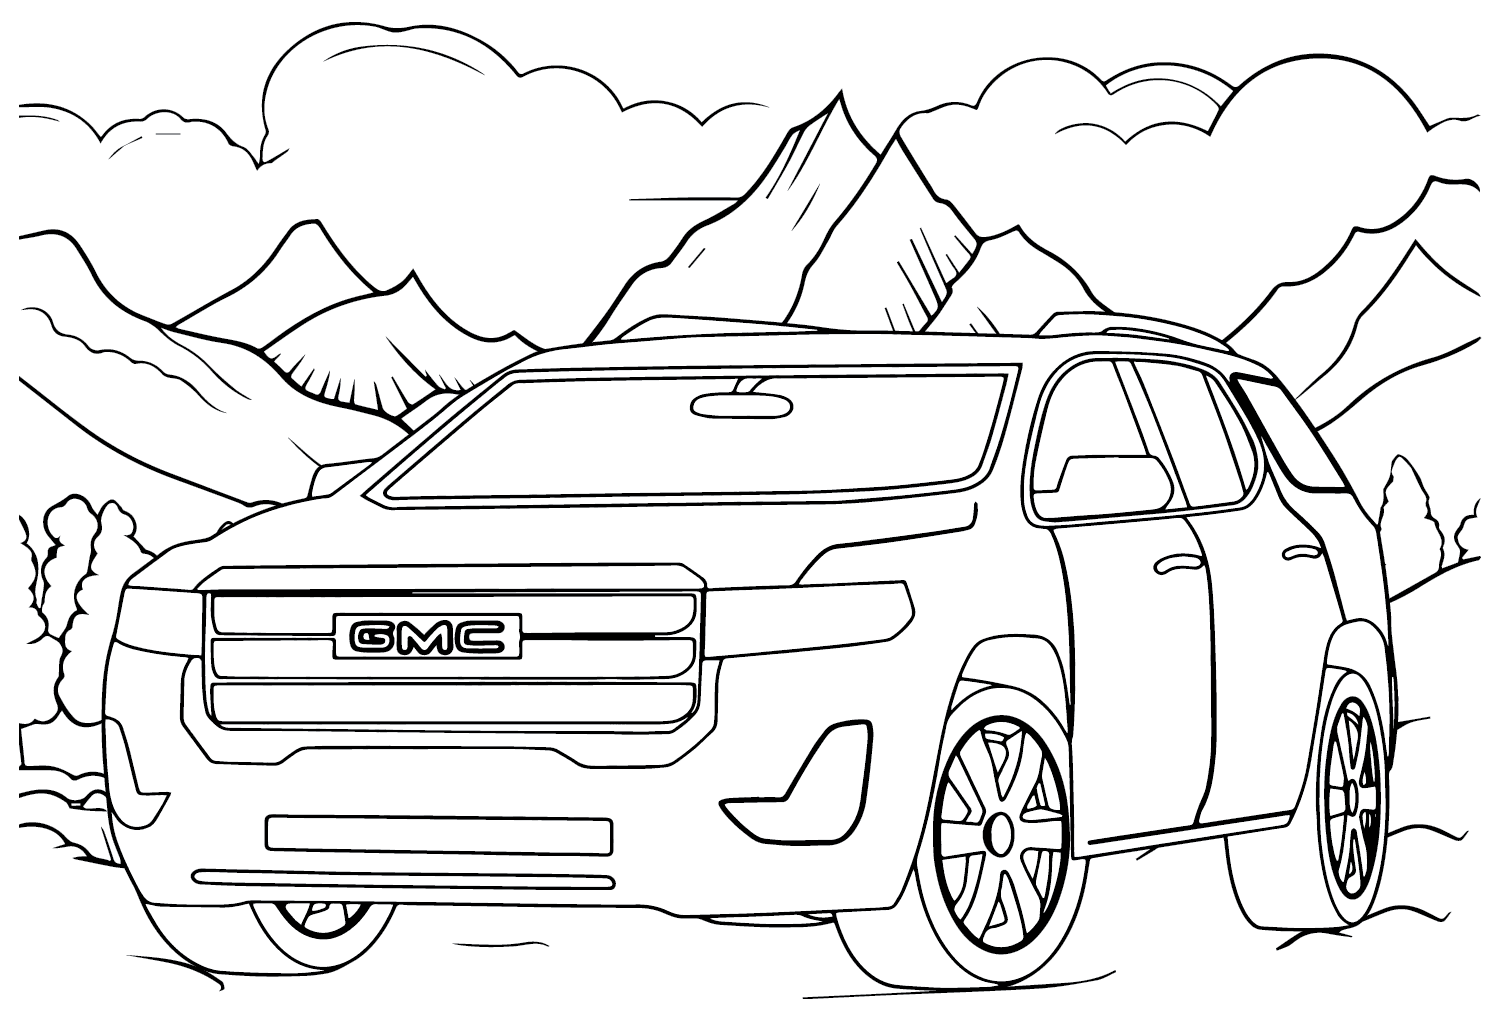 GMC Canyon Trucks Coloring Page - Free Printable Coloring Pages